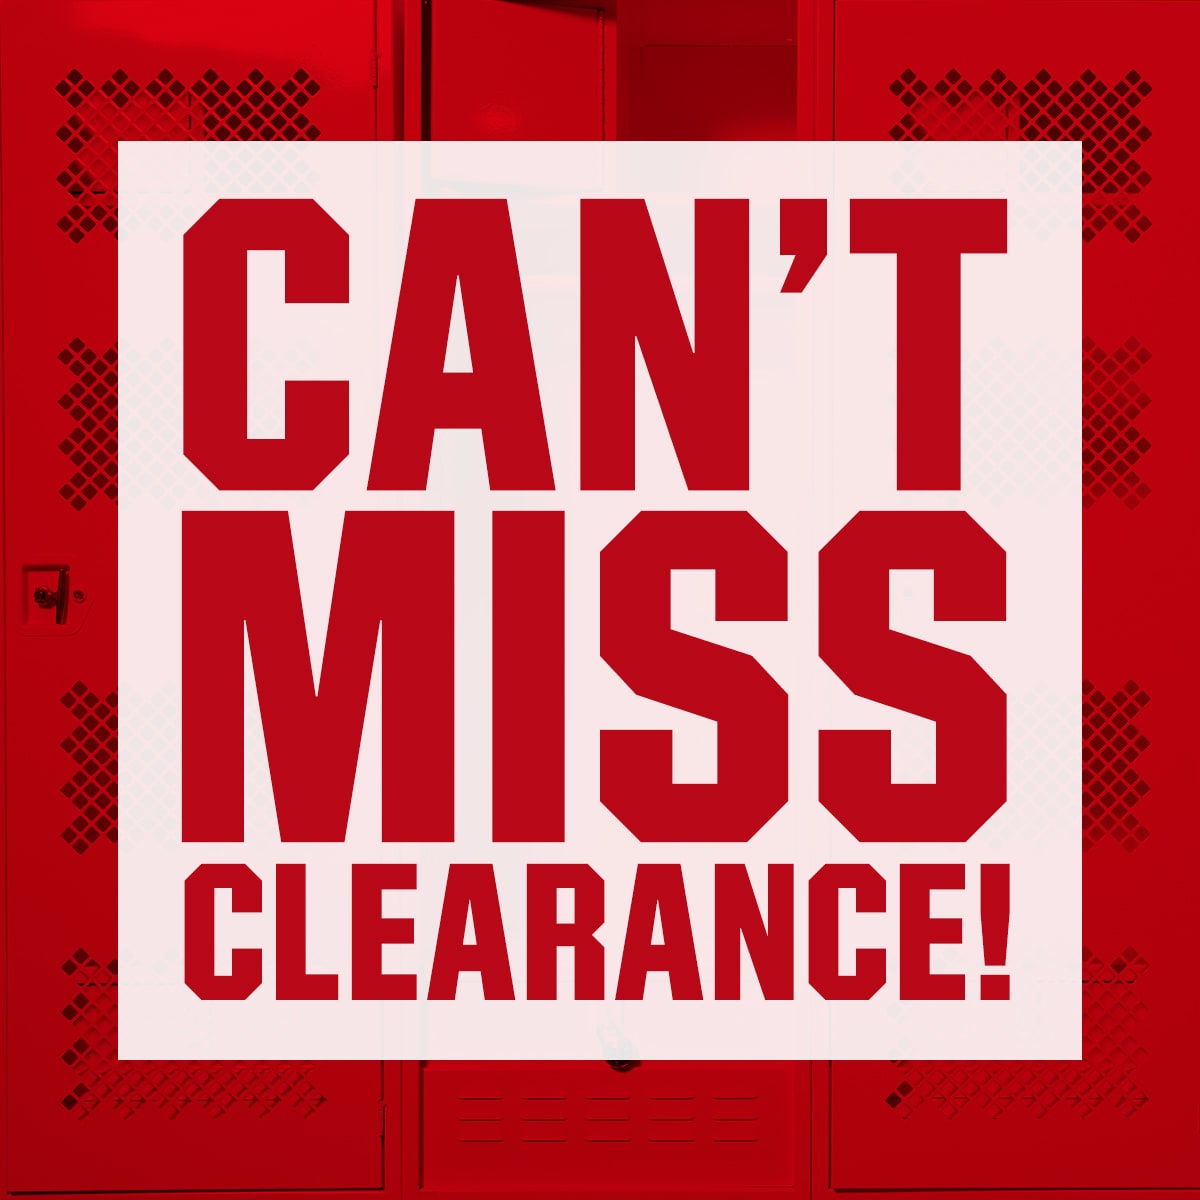 Can't miss clearance!